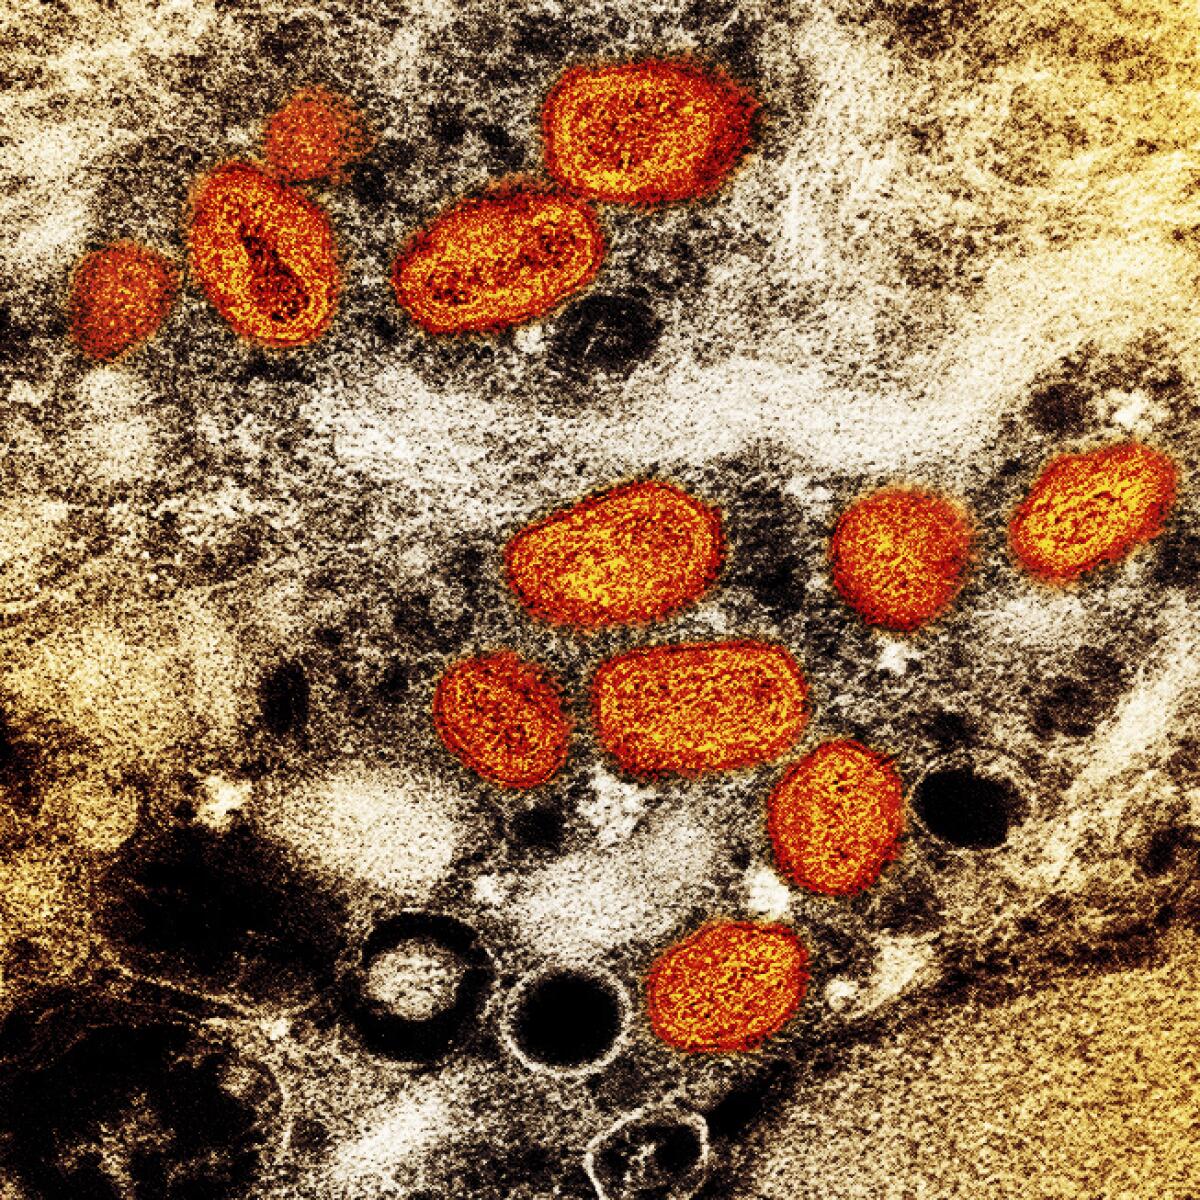 This image shows particles of the MPX virus (orange) found within an infected cell (brown), cultured in the laboratory.